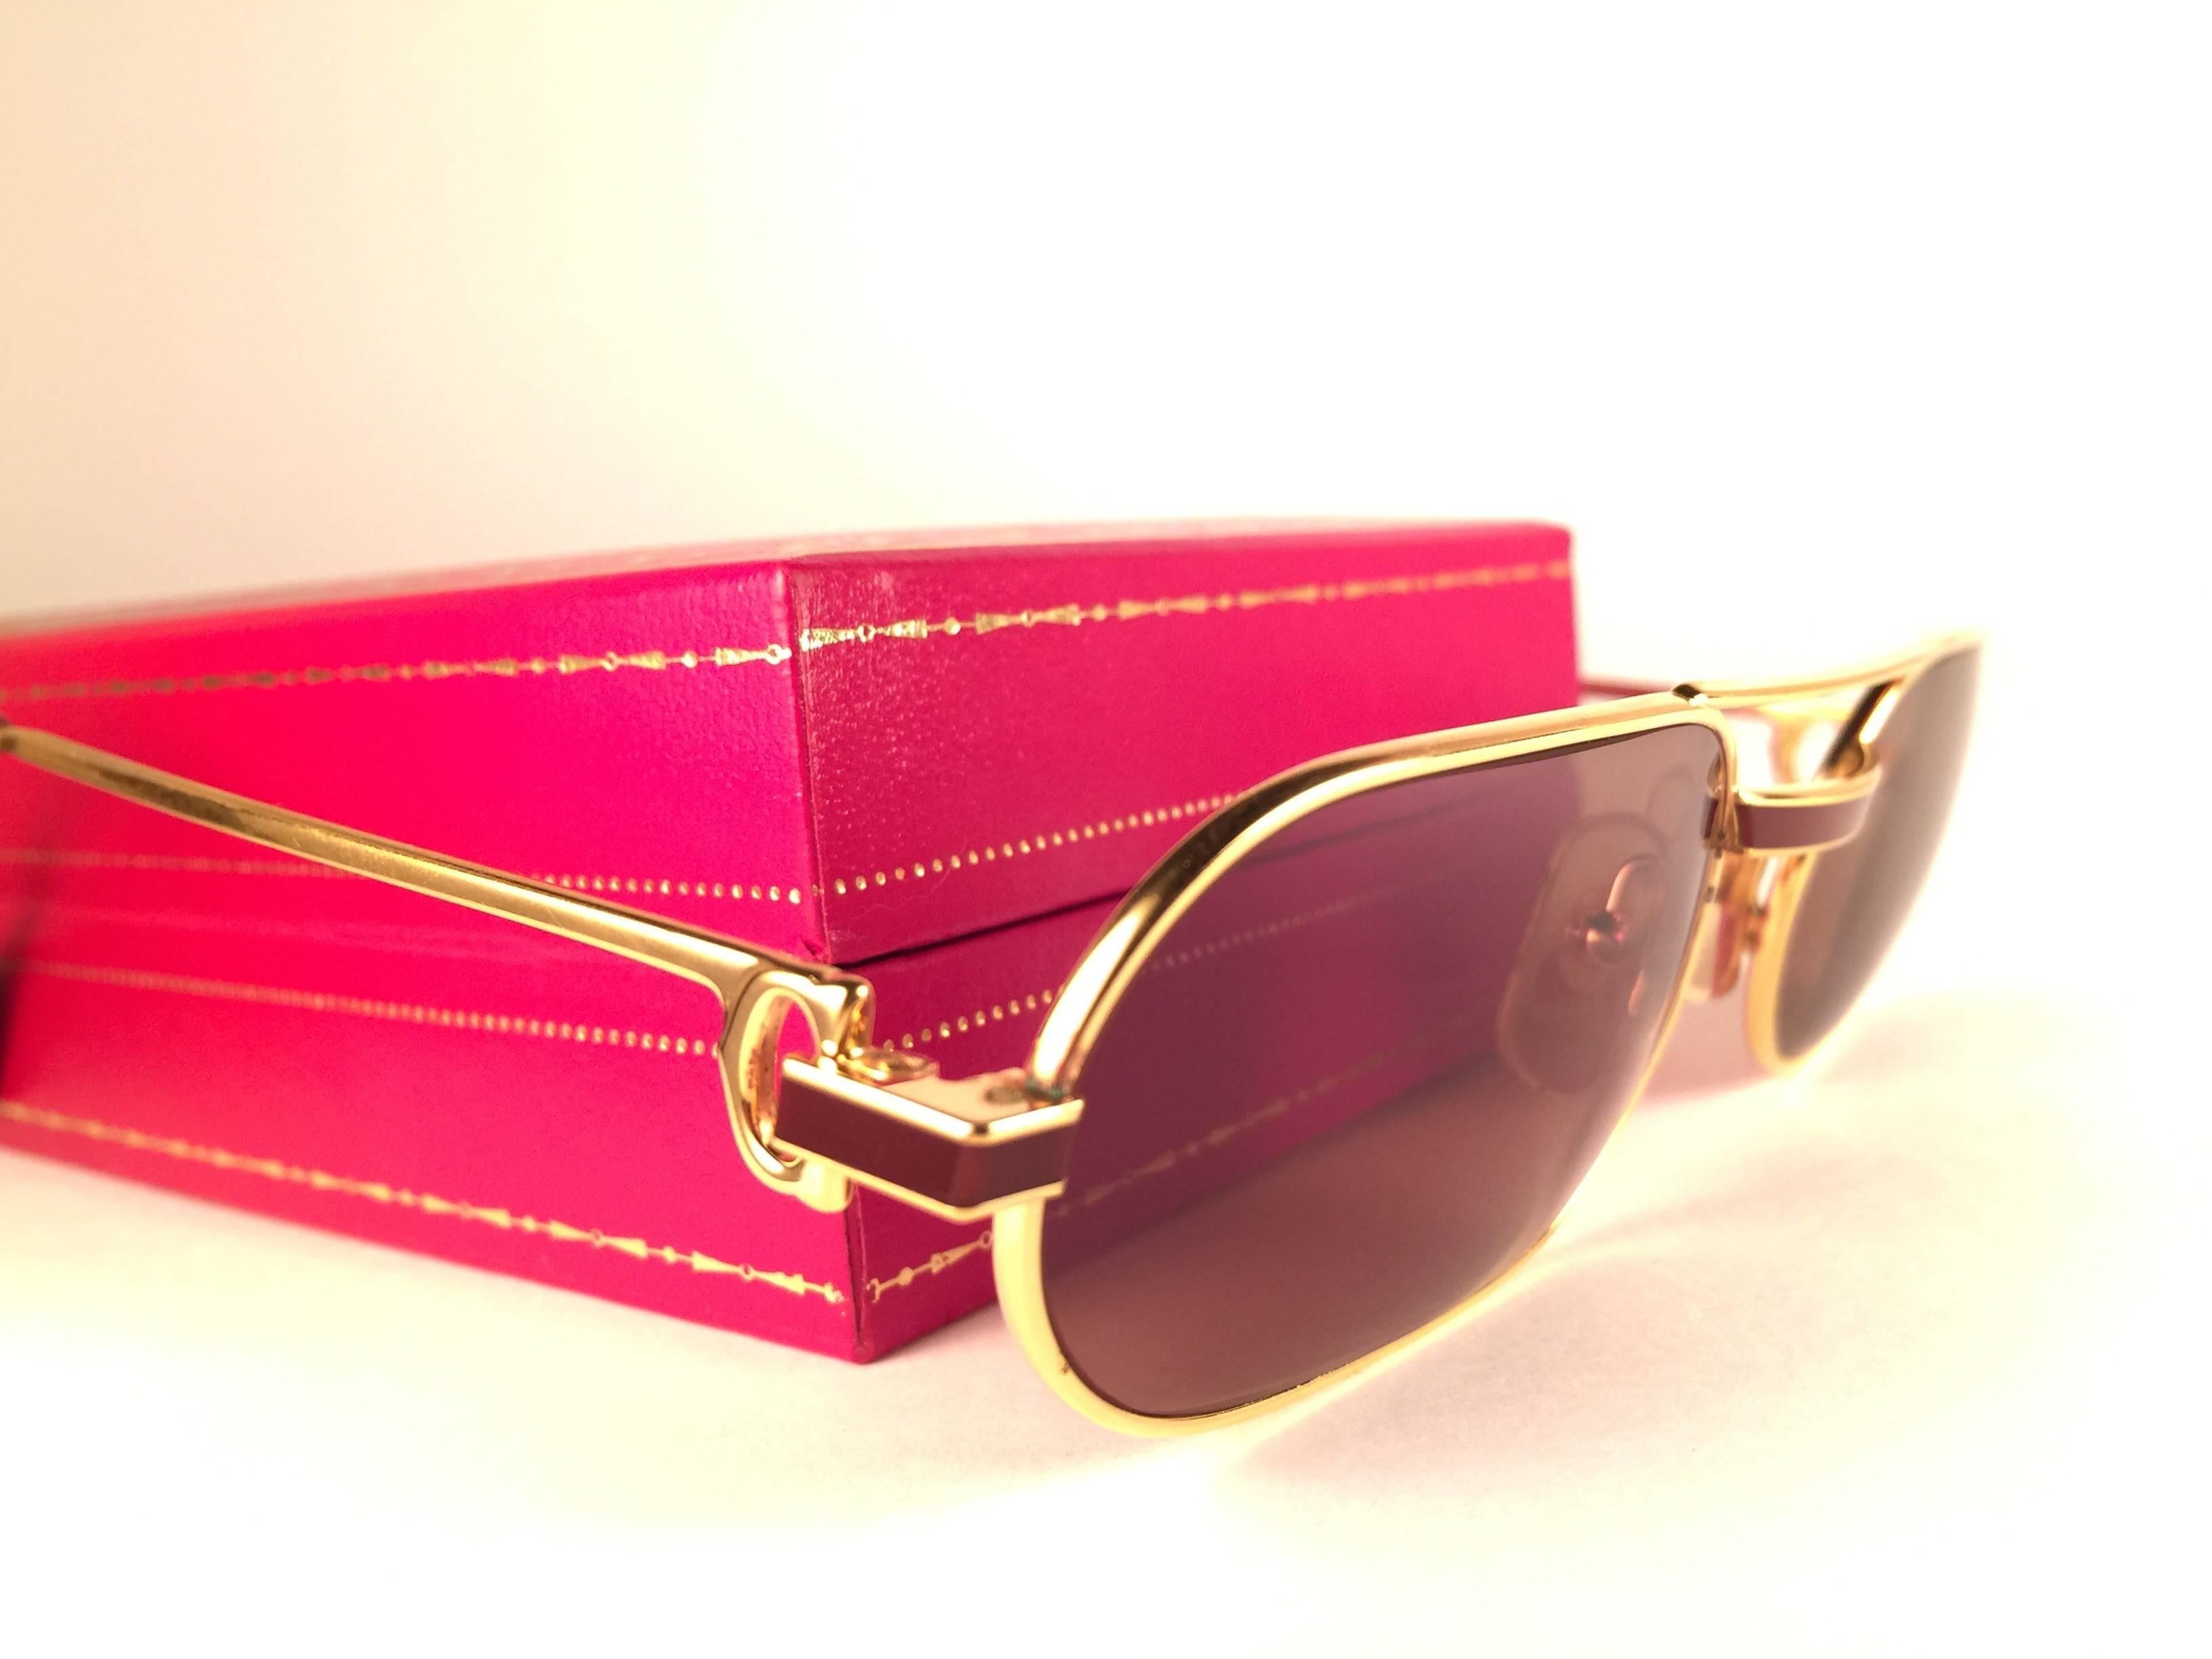 Original 1983 Cartier Louis Cartier Laque De Chine sunglasses with new honey brown lenses. All hallmarks. Red enamel with Cartier gold signs on the burgundy ear paddles. Both arms sport the C from Cartier on the temple. These are like a pair of